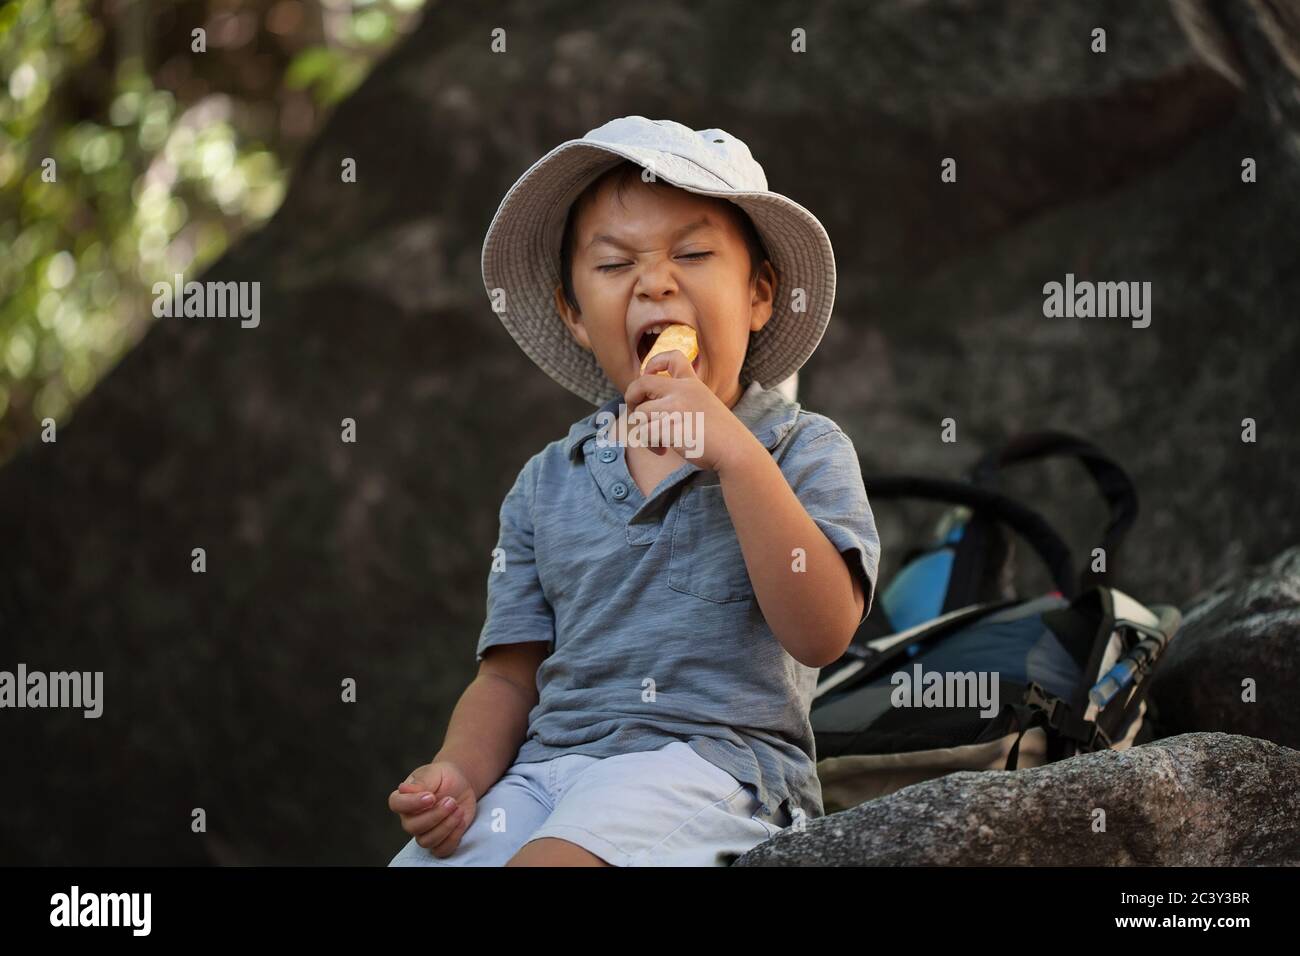 Eating healthy snacks, a young boy is taking a bite out of a apple while resting during a hike. Stock Photo